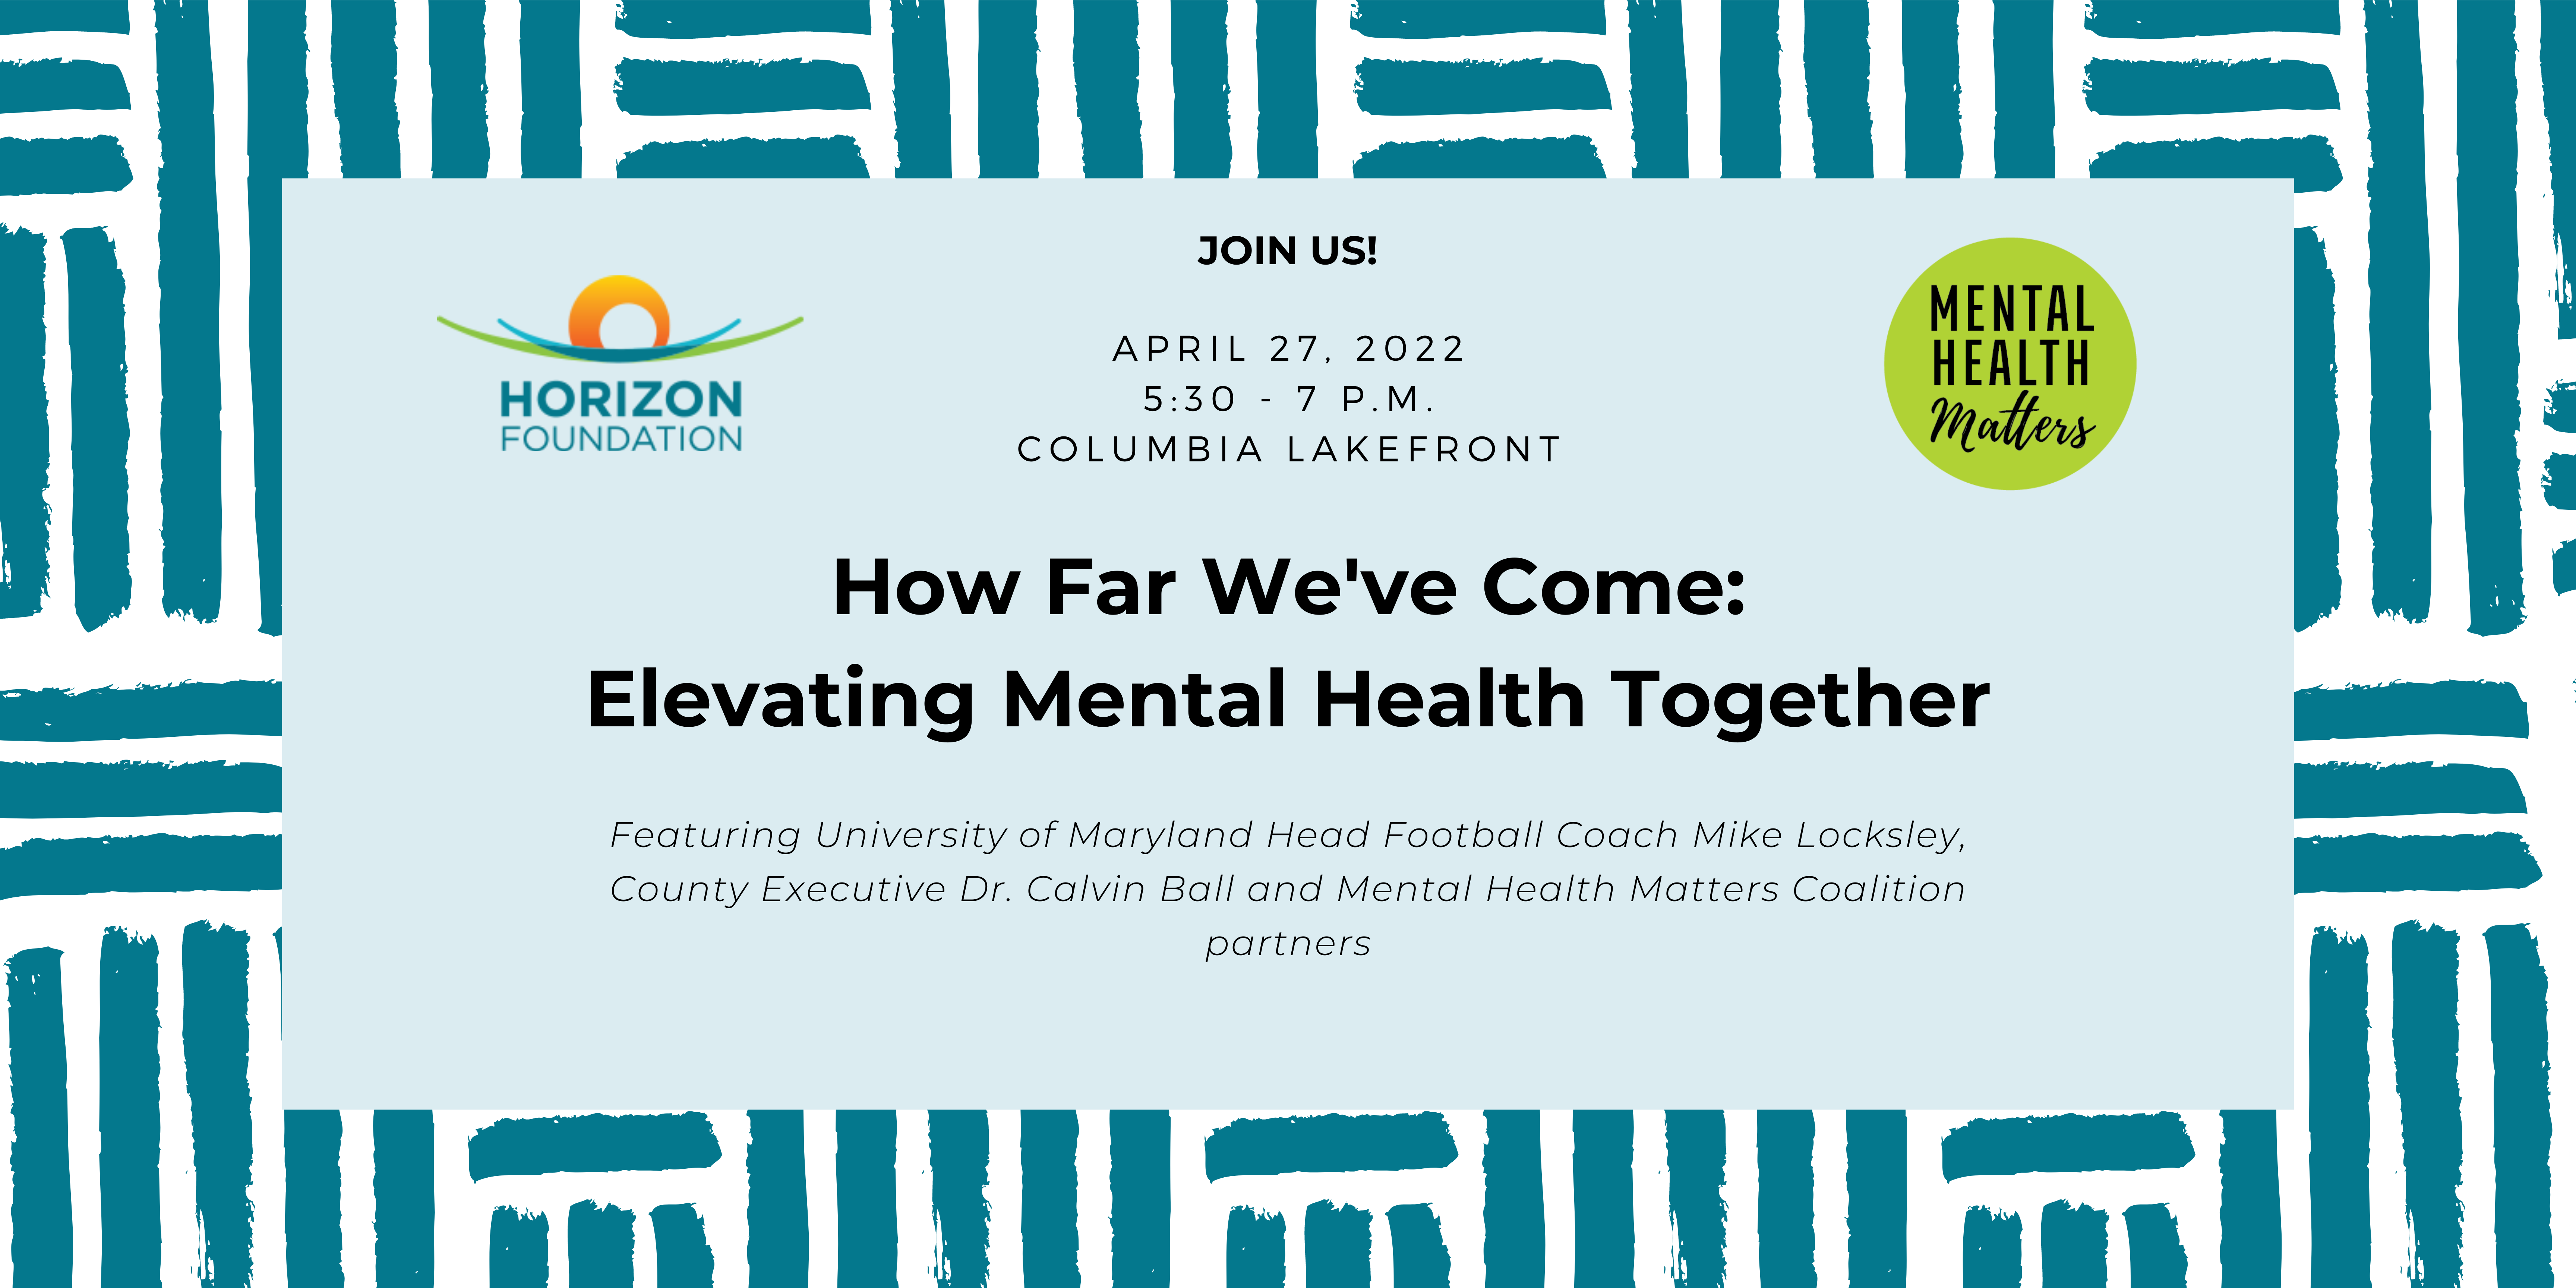 You’re Invited! Join us for How Far We’ve Come: Elevating Mental Health Together